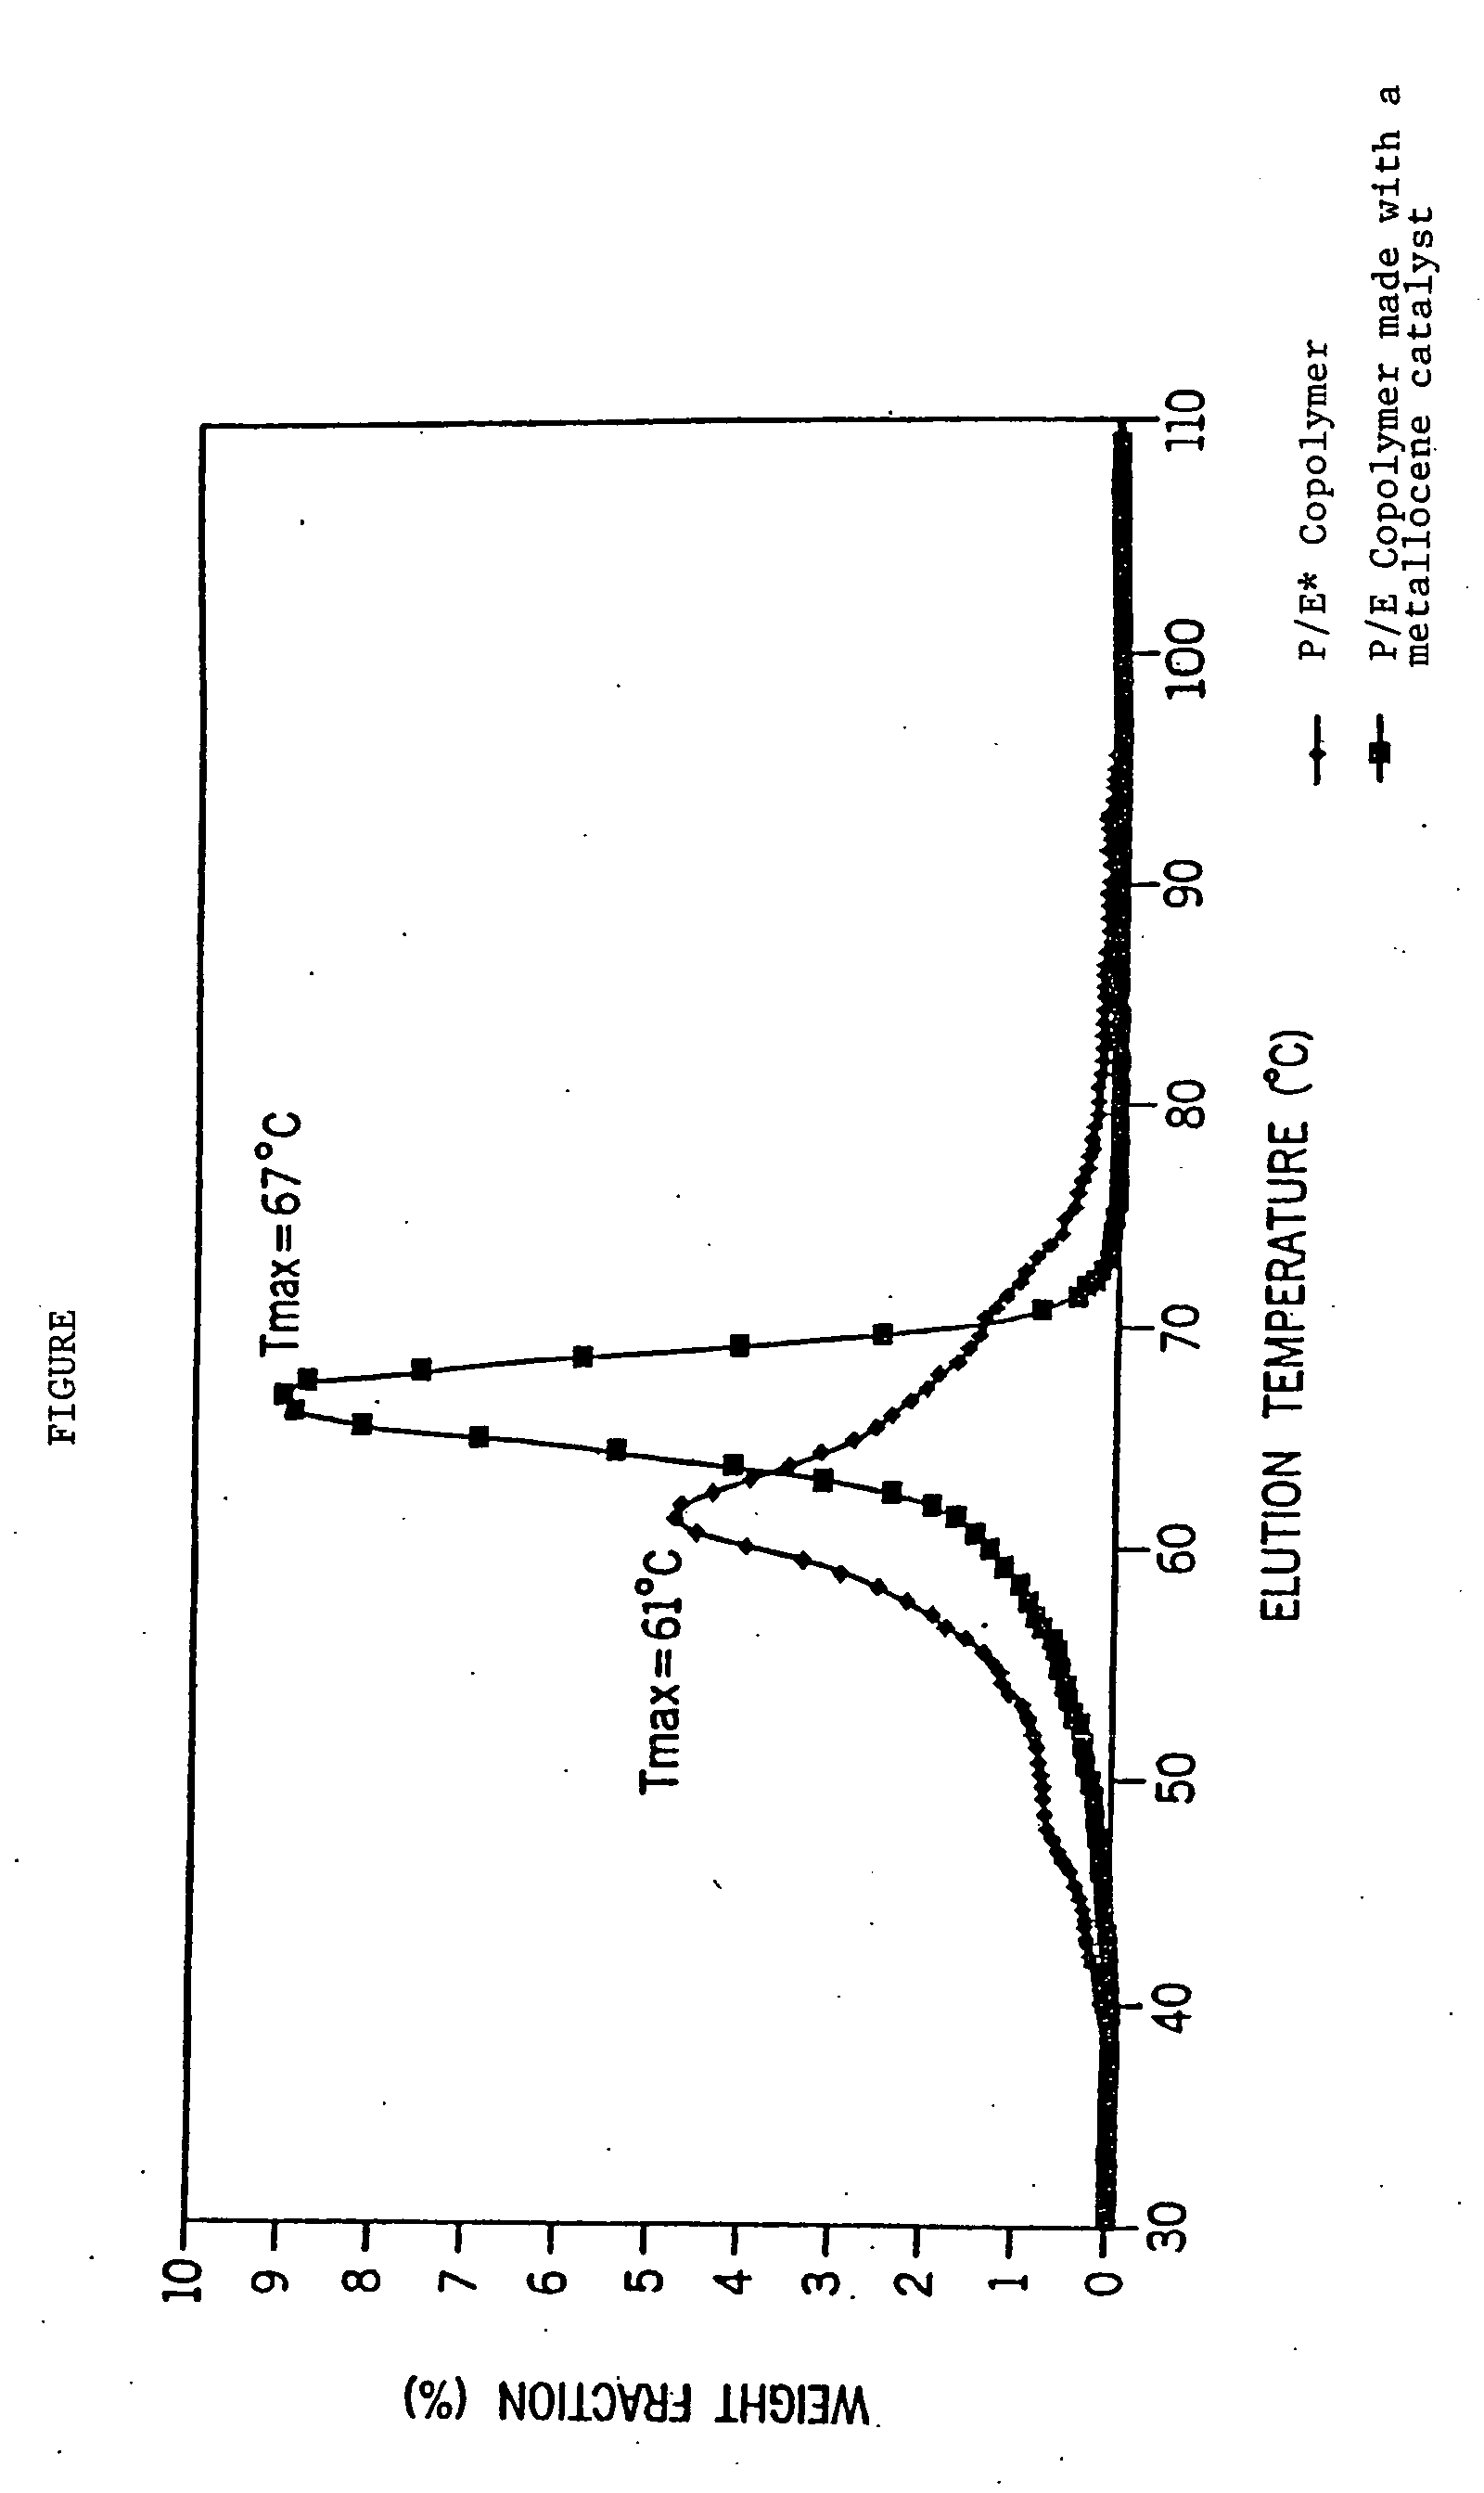 Filled thermoplastic olefin composition